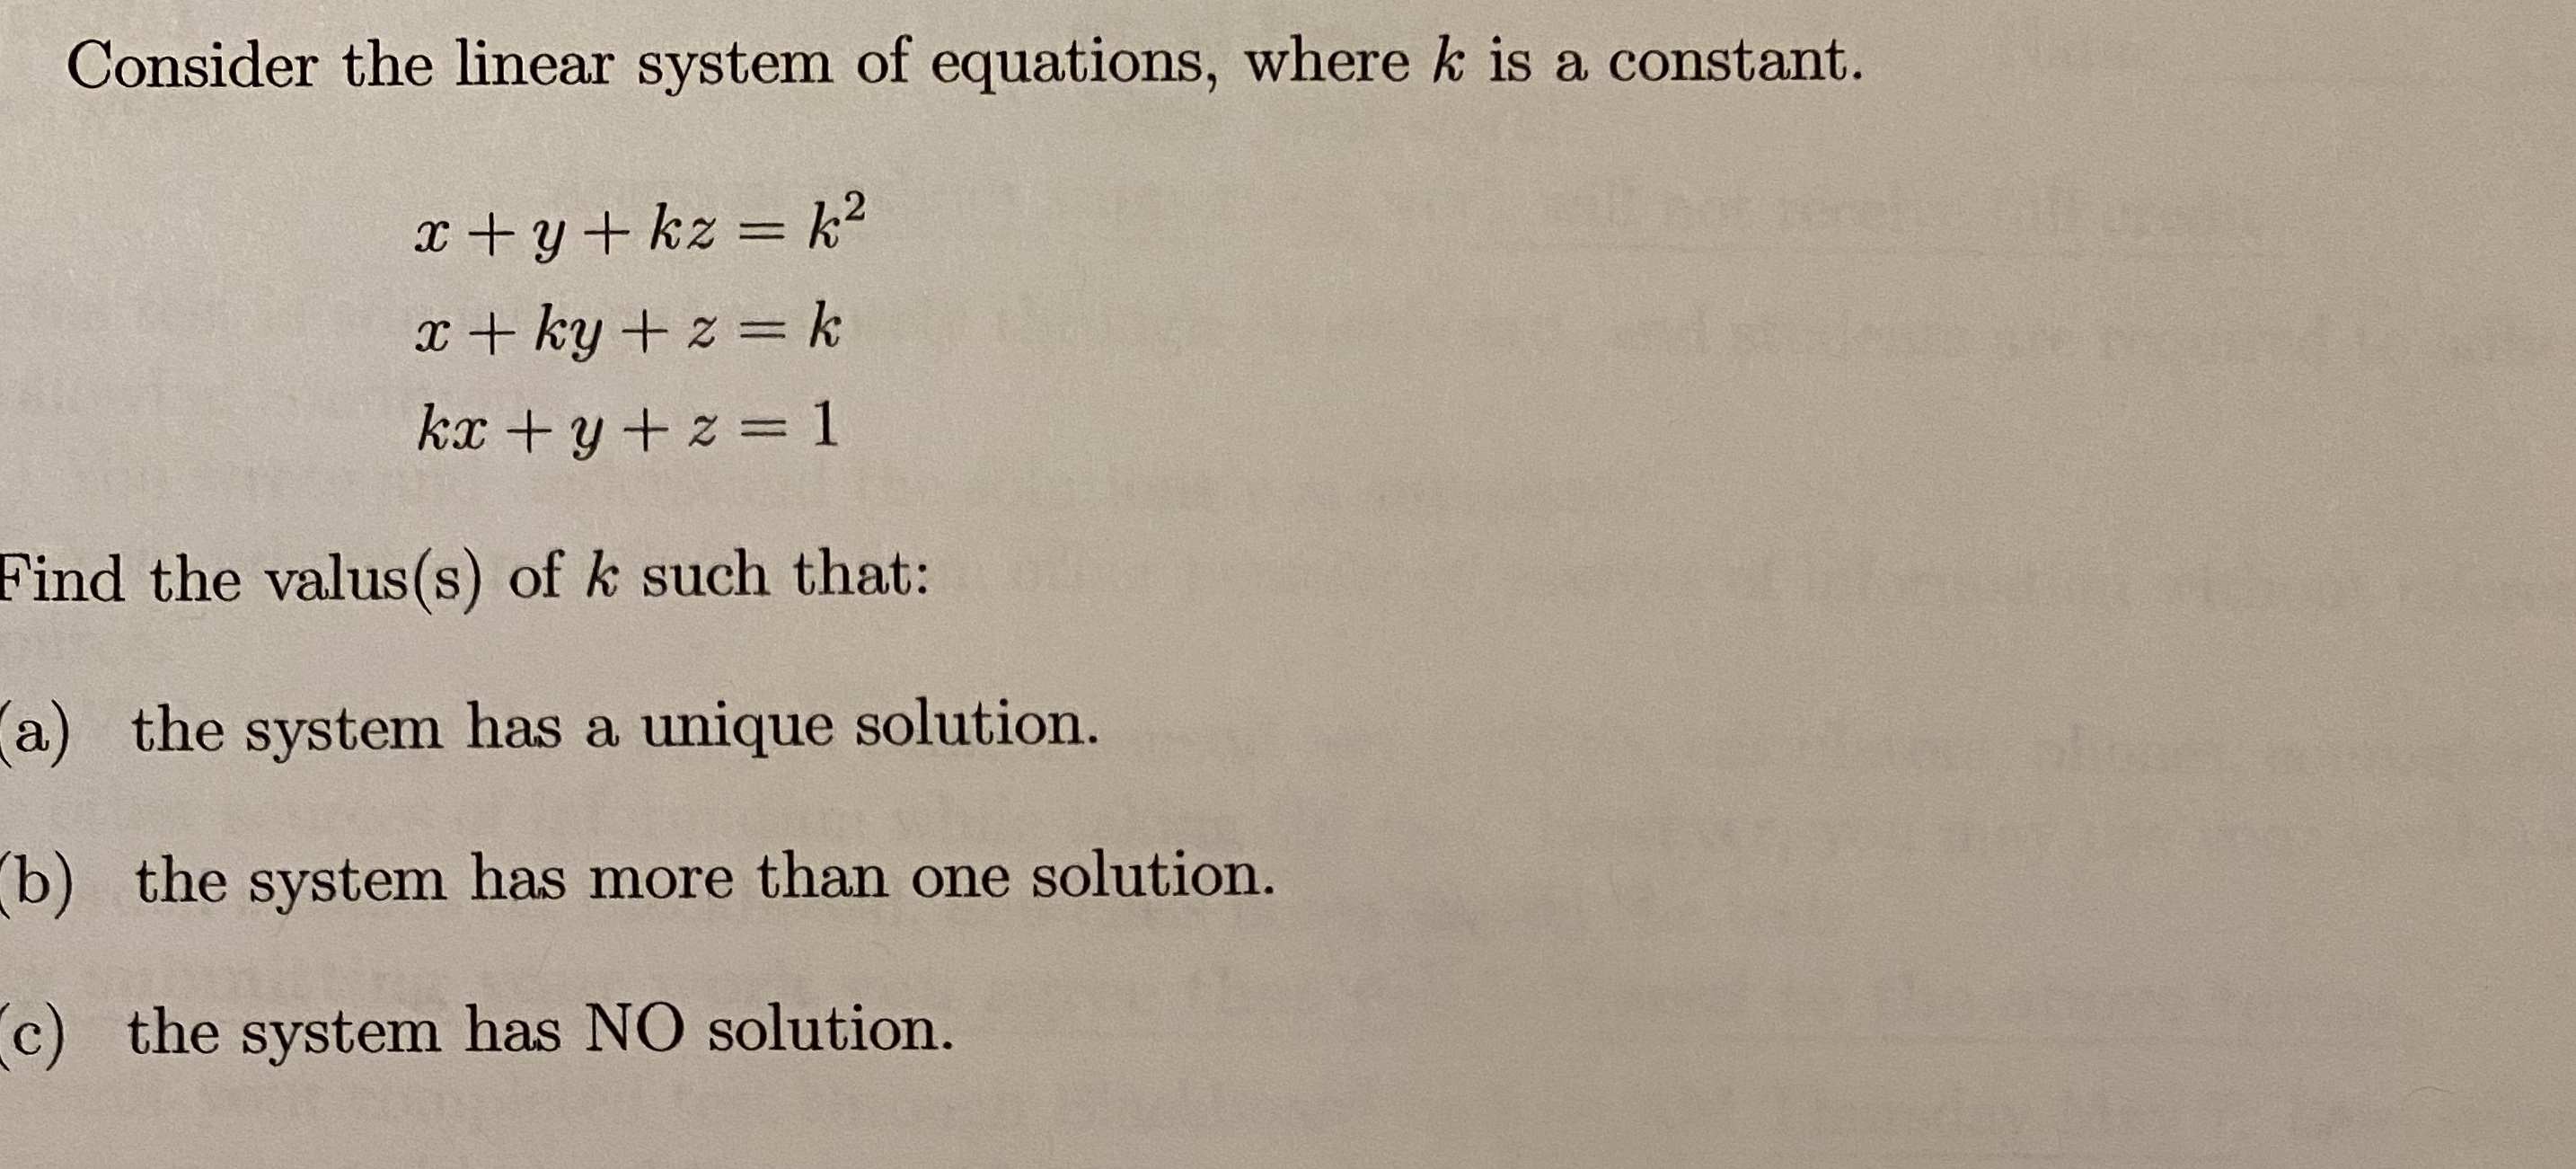 Consider the linear system of equations, where k is a constant.
erek
x + y+ kz = k2
%3D
x + ky + z = k
kx +y + z = 1
Find the valus(s) of k such that:
a) the system has a unique solution.
b) the system has more than one solution.
c) the system has NO solution.
